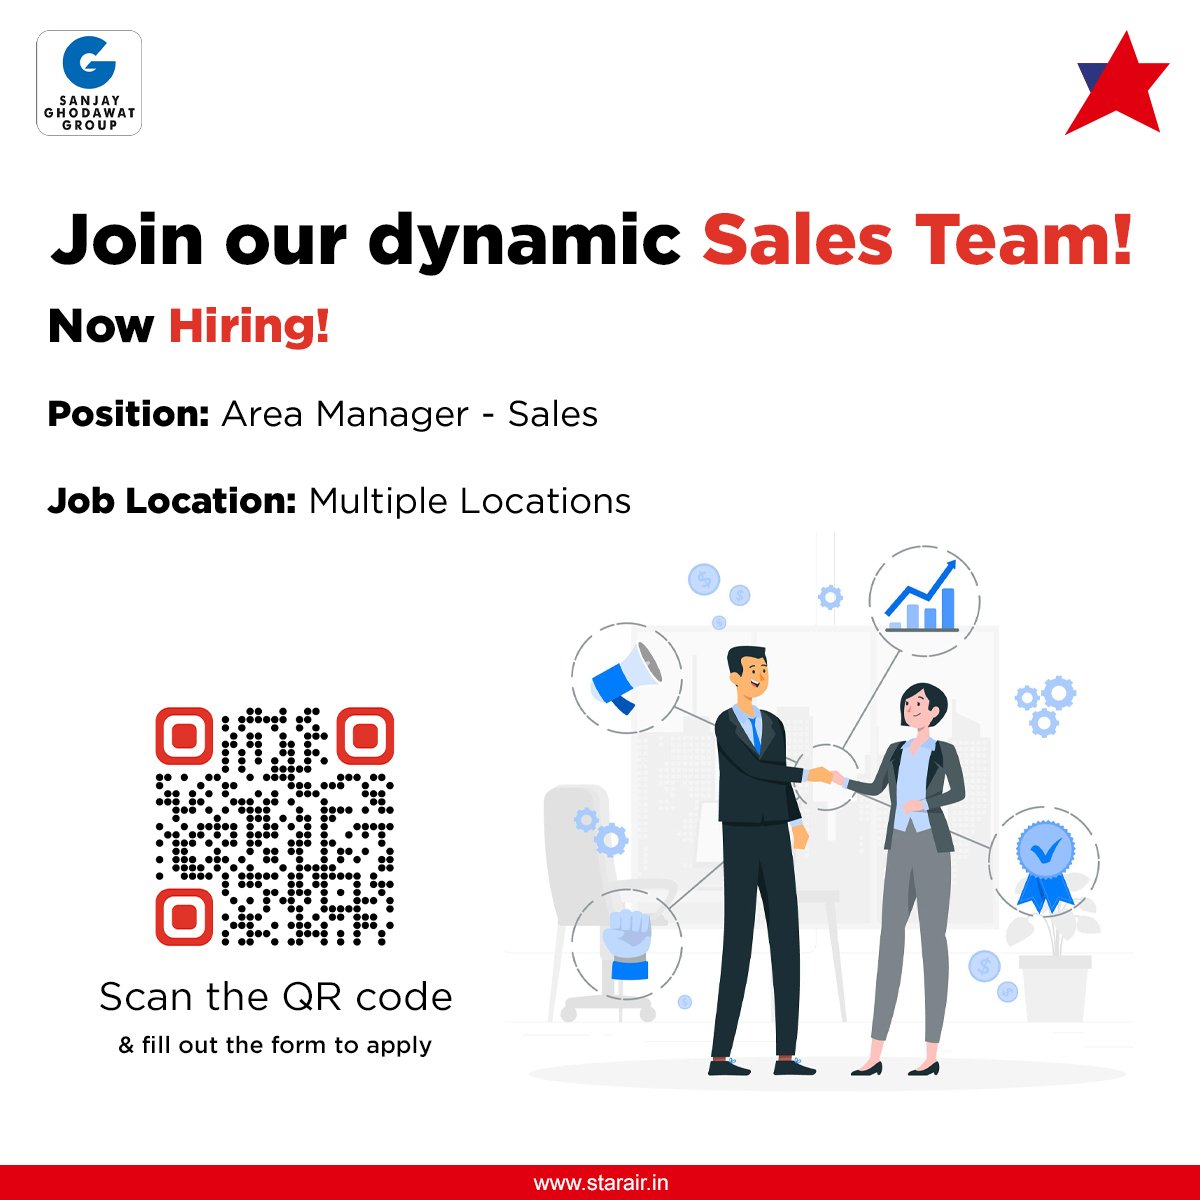 Ready to take off on this exciting journey?

Star Air is on the lookout for Area Manager - Sales.

Scan the QR code and let's make your career soar to new heights!

#OfficialStarAir #WeCare #ConnectingReallndia #FlyNonStop #FlyWithStarAir #SGGRising #Hiring #AirlineRecruitment